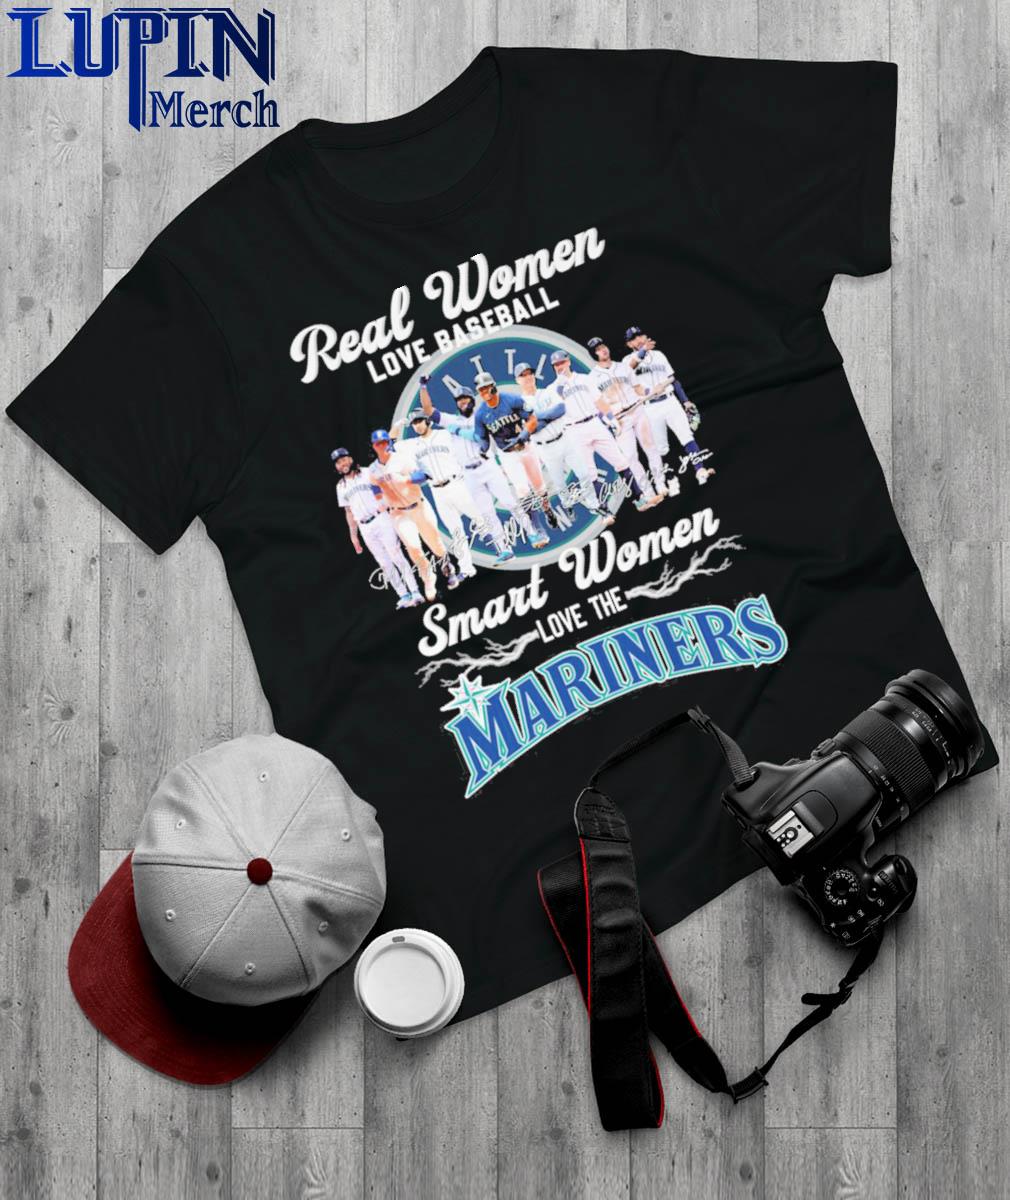 Official real women love baseball smart women love the mariners team T-shirt,  hoodie, sweater, long sleeve and tank top